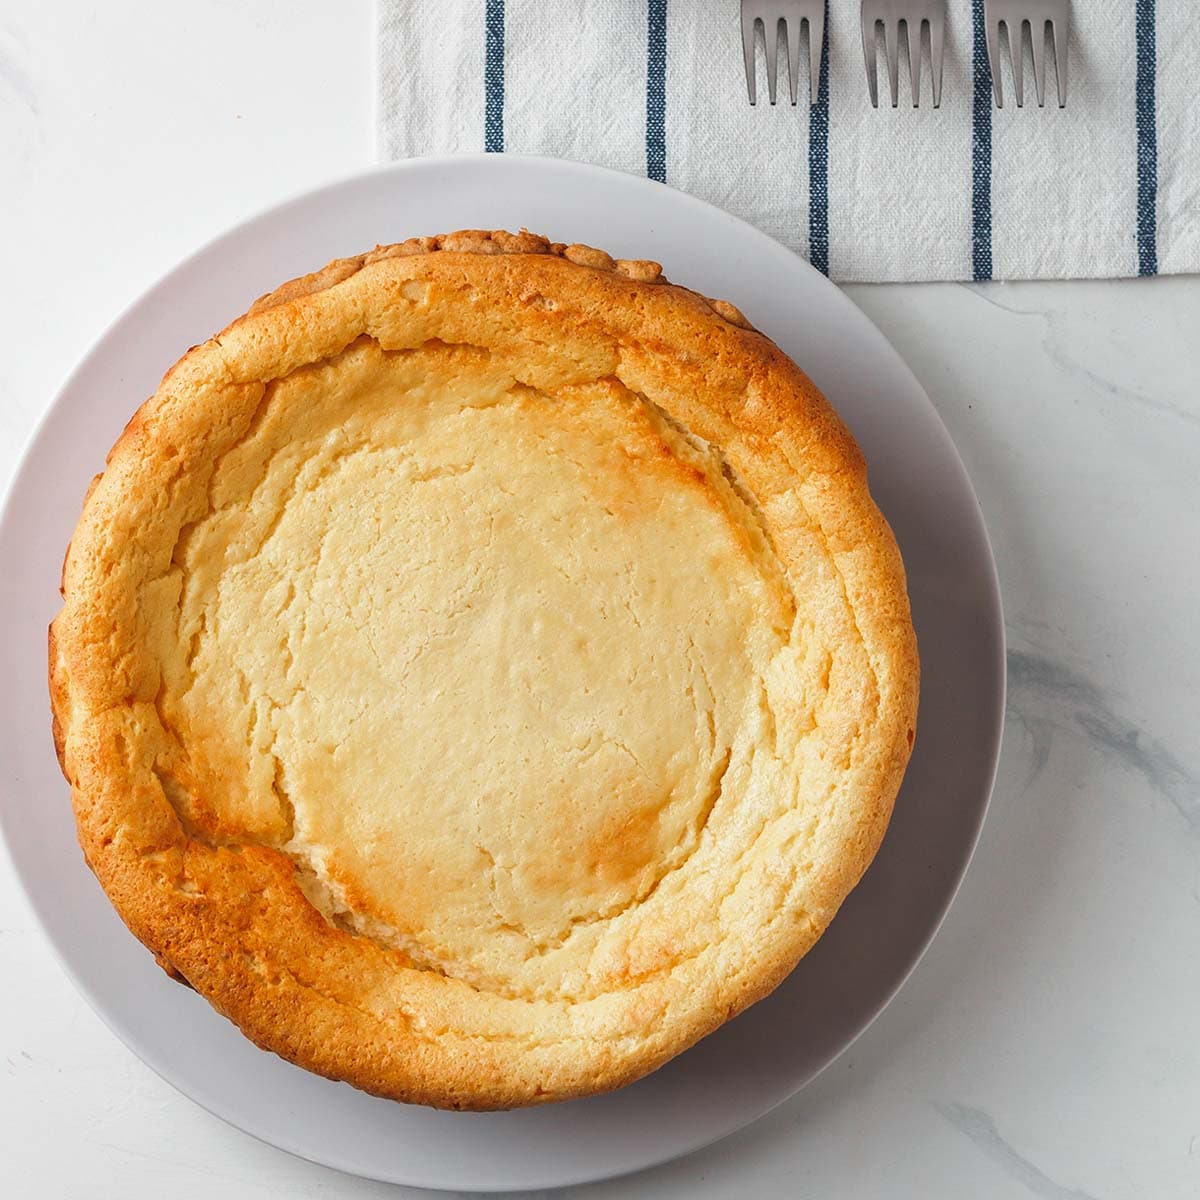 If a cheesecake dries out too much as it bakes, this also can cause cracking. To negate this, place a pan of water on another rack directly below the cheesecake.